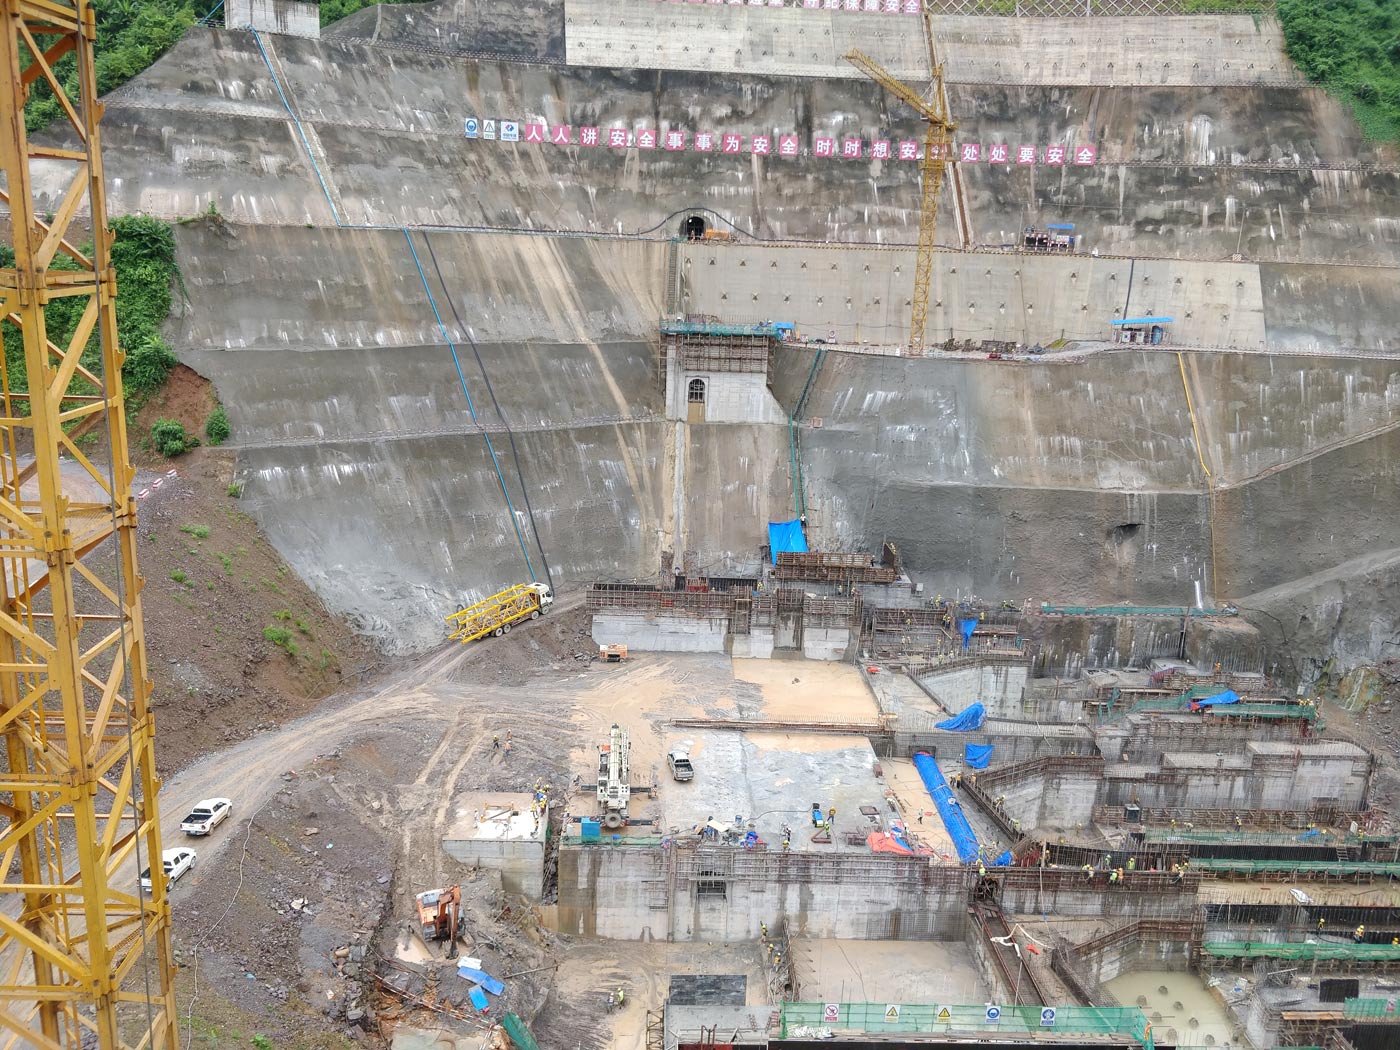 Nam Ou 3’s construction site with safety warning in Chinese at the top of the dam, 12 August 2018. Source: International Rivers